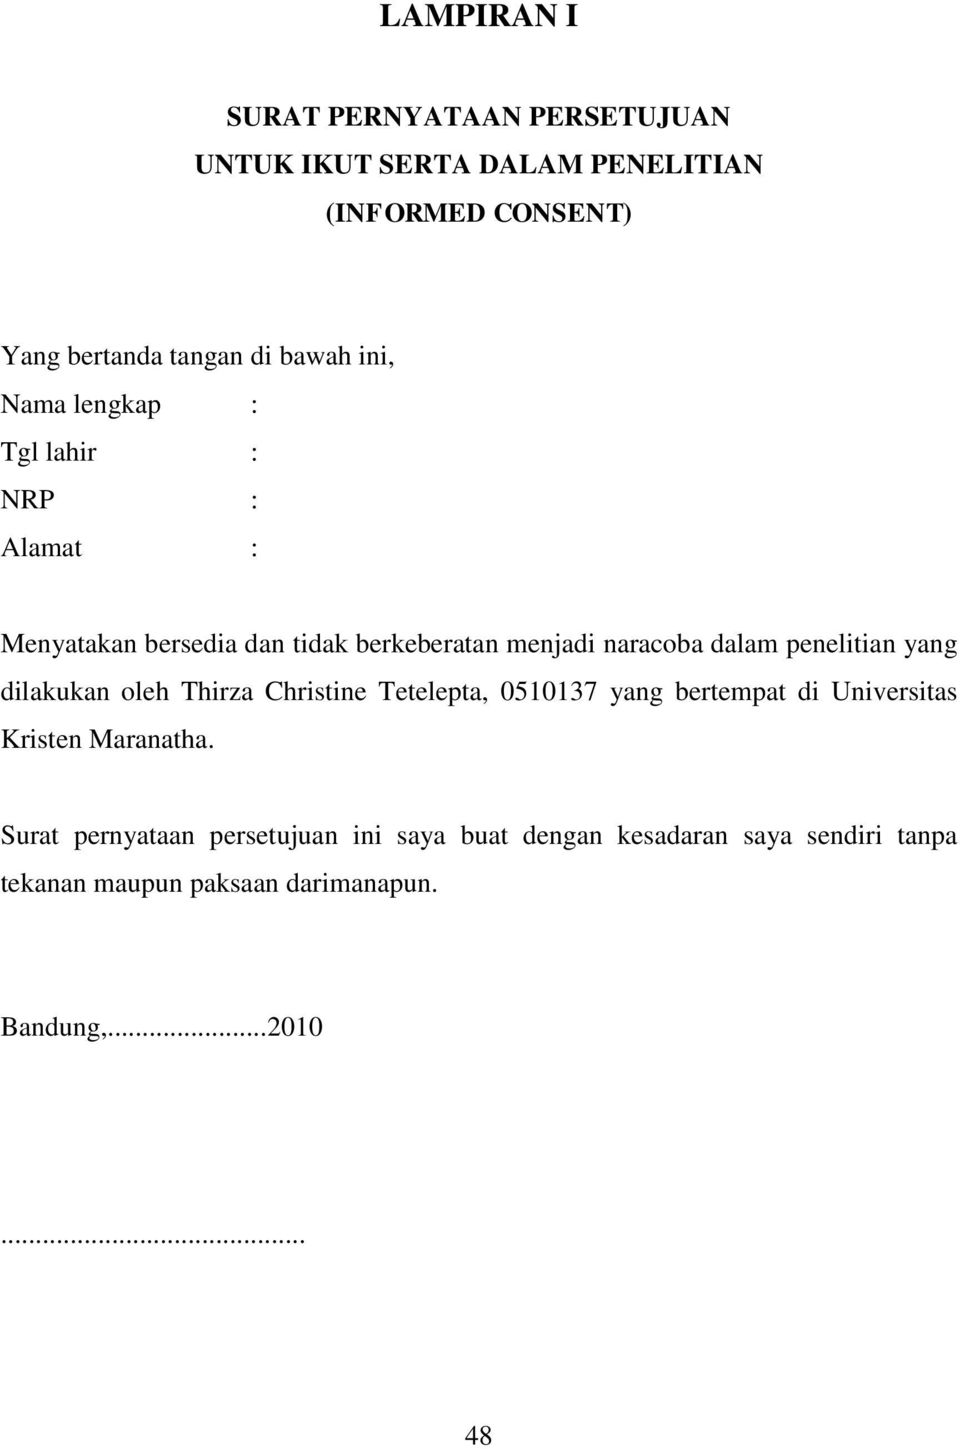 Detail Informed Consent Contoh Nomer 17